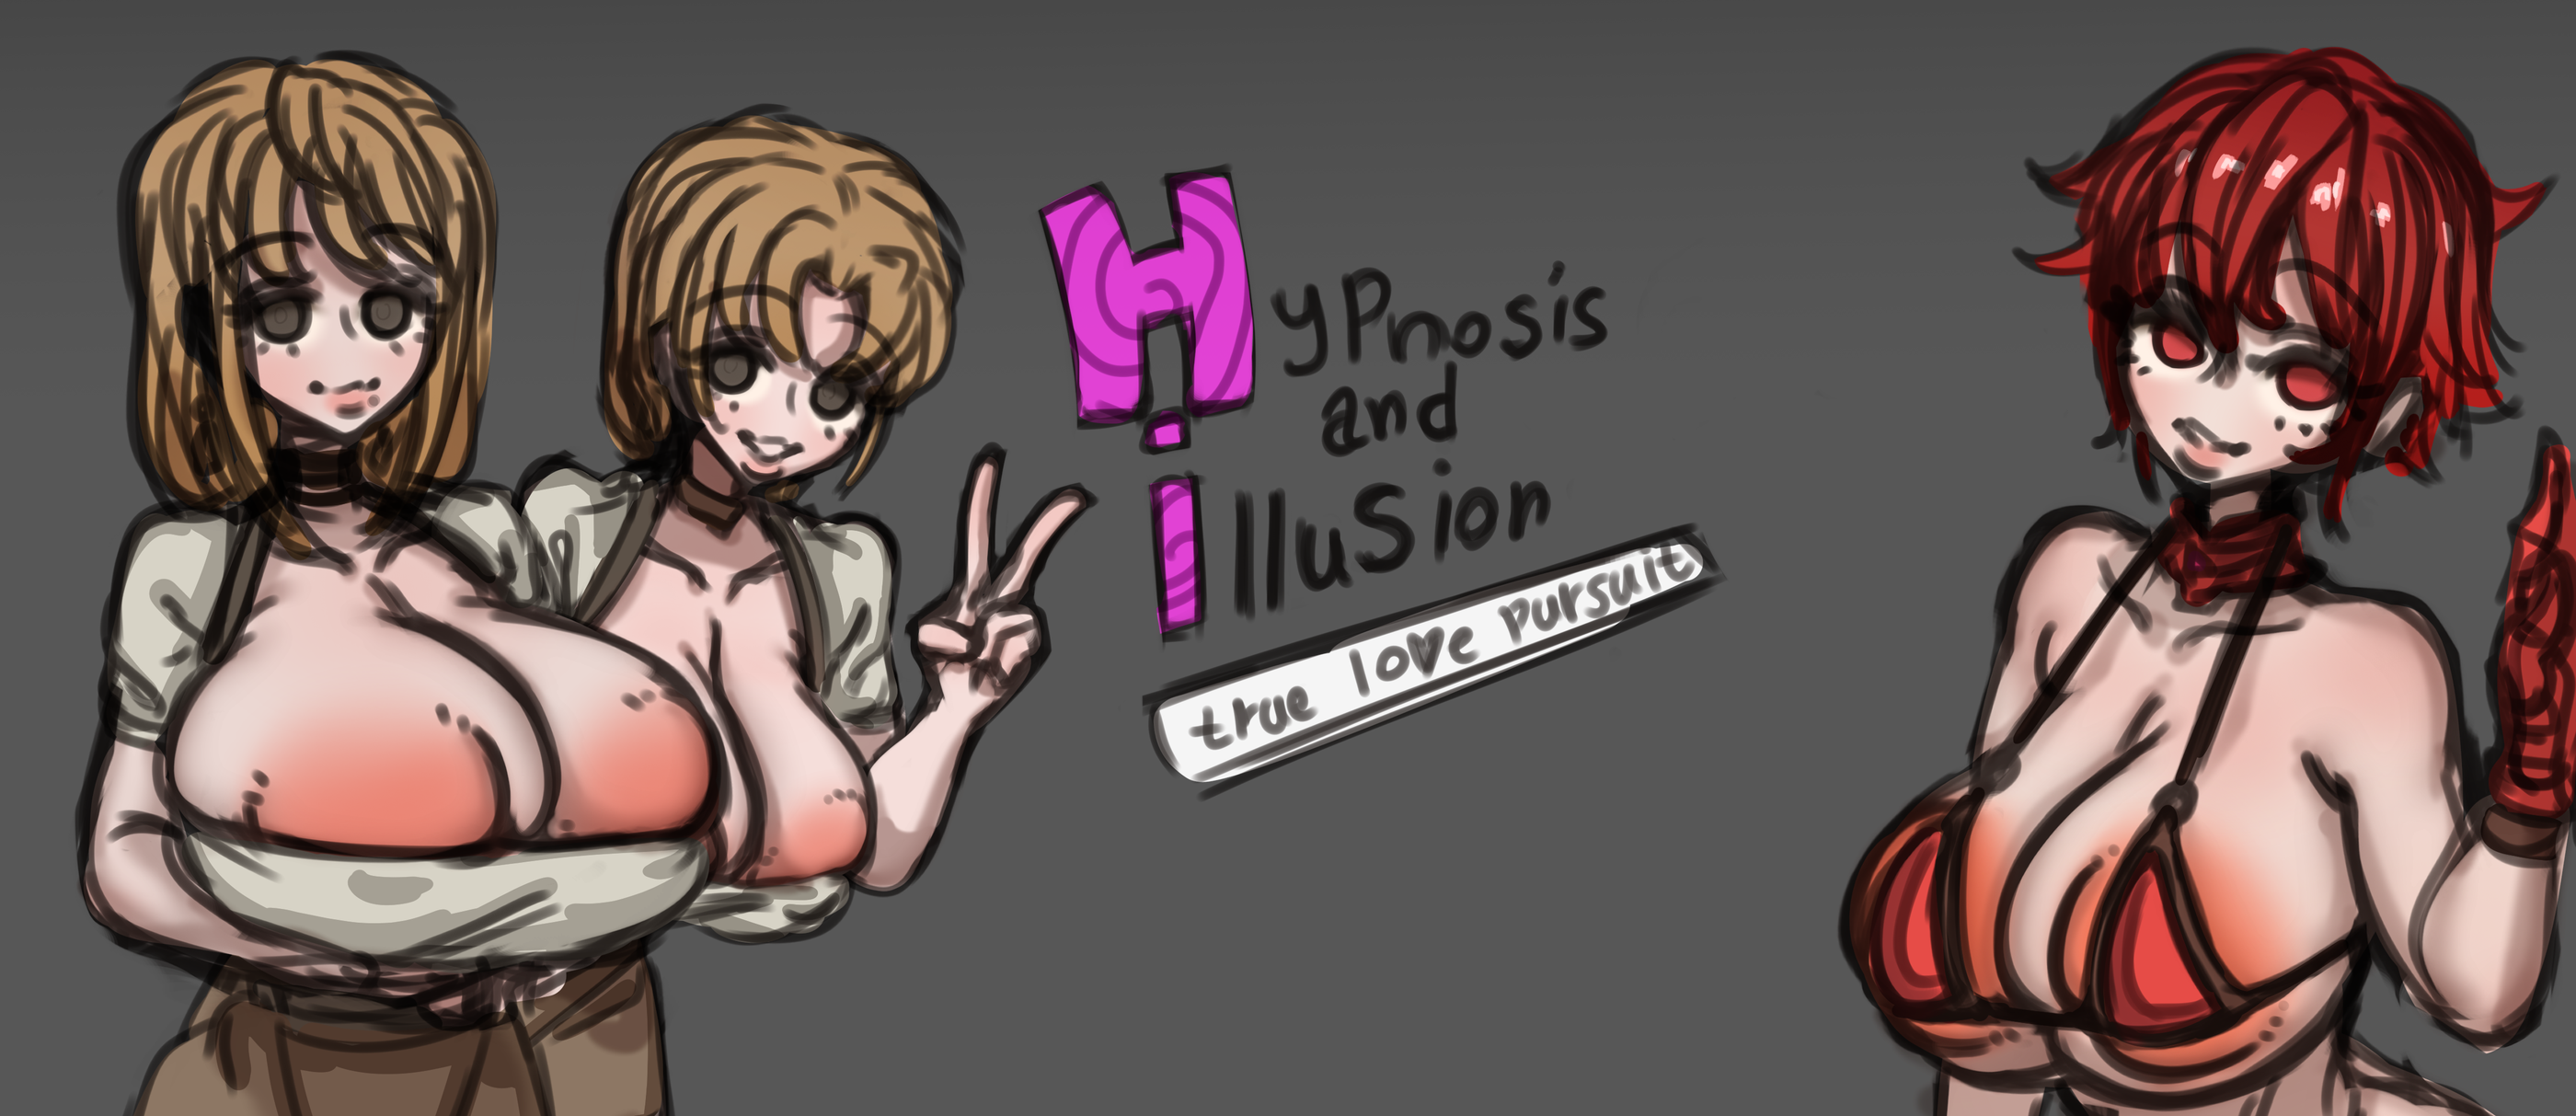 Hypnosis and illusion: true love pursuit